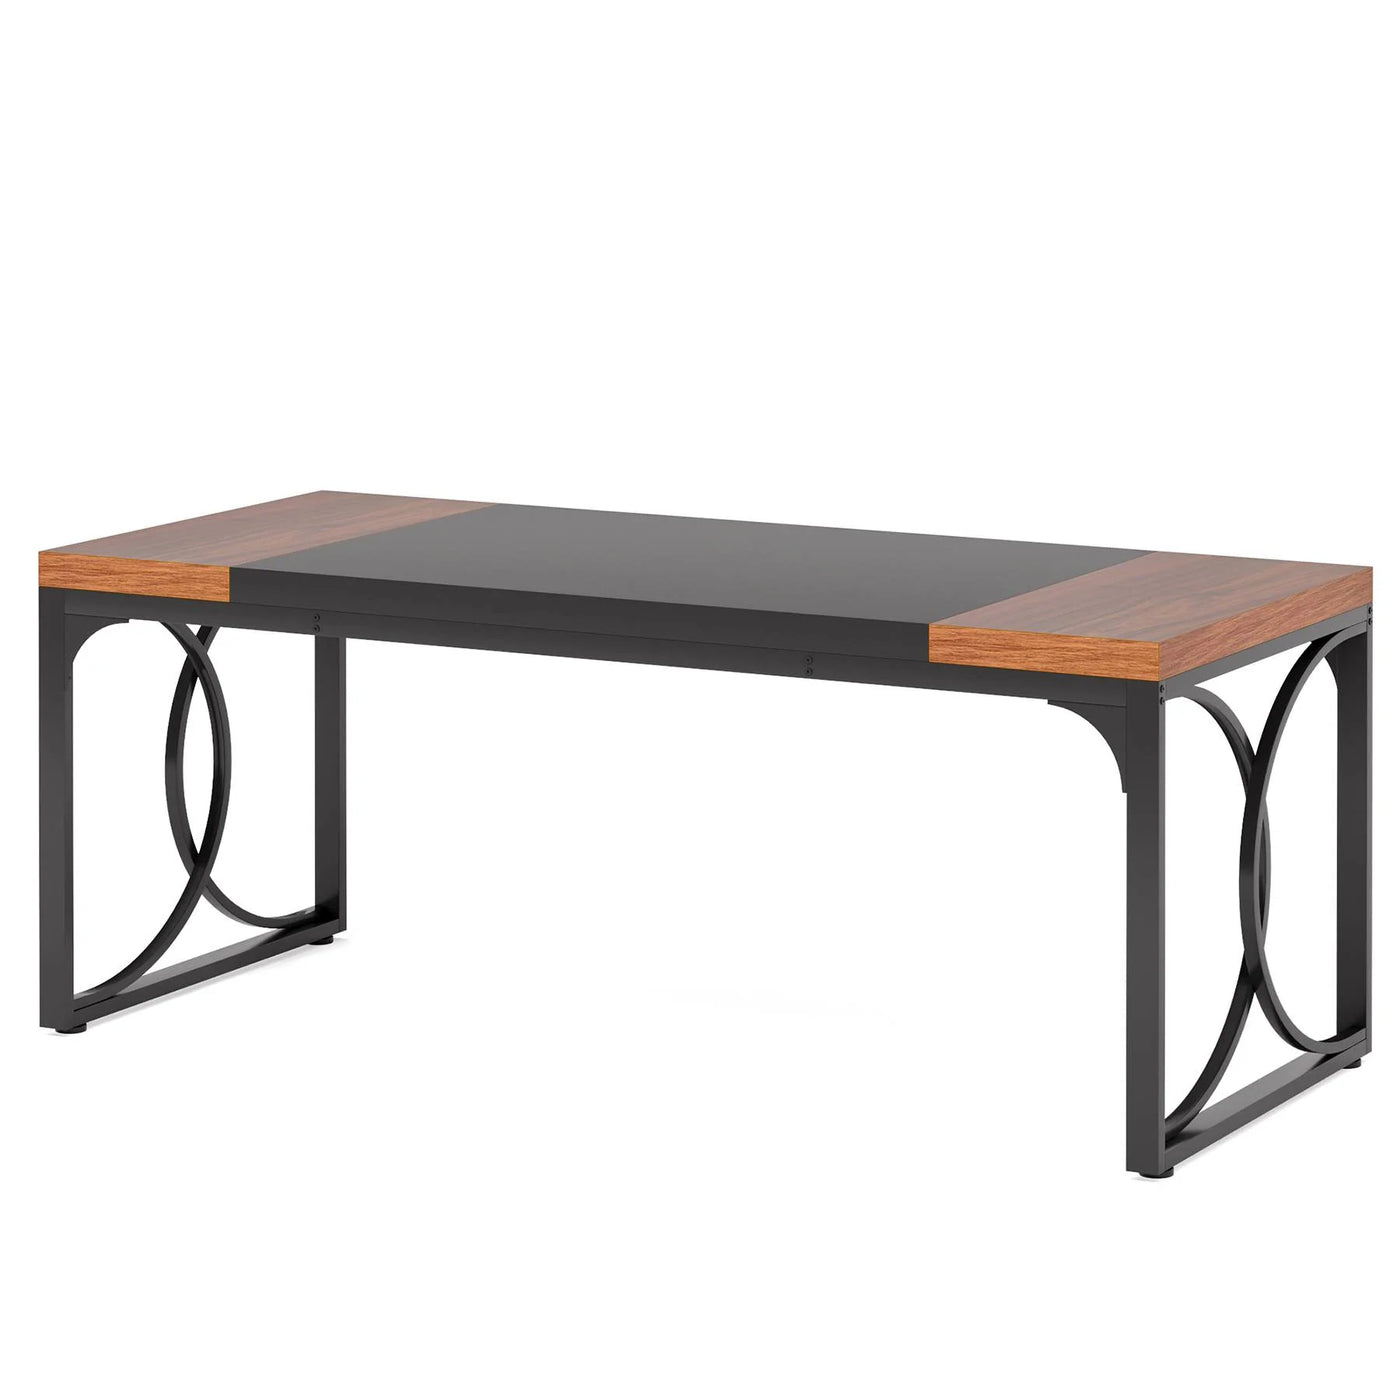 Miniken Industrial Dining Table | 63" Rectangular Kitchen Table with Strong Metal Frame